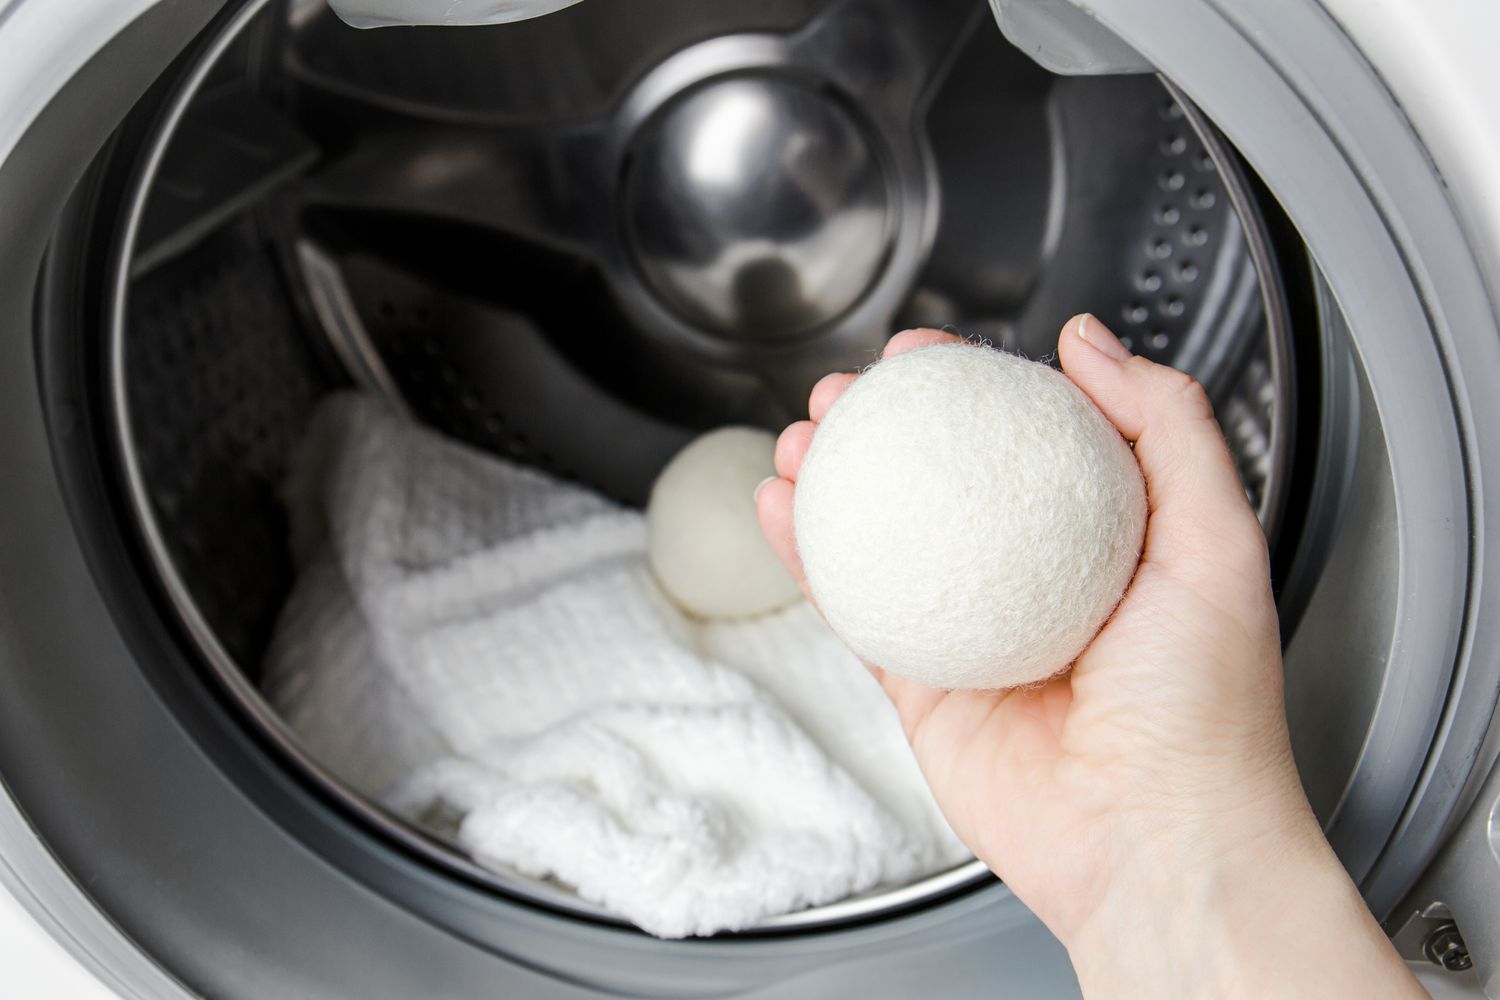 What Are Dryer Balls Used For